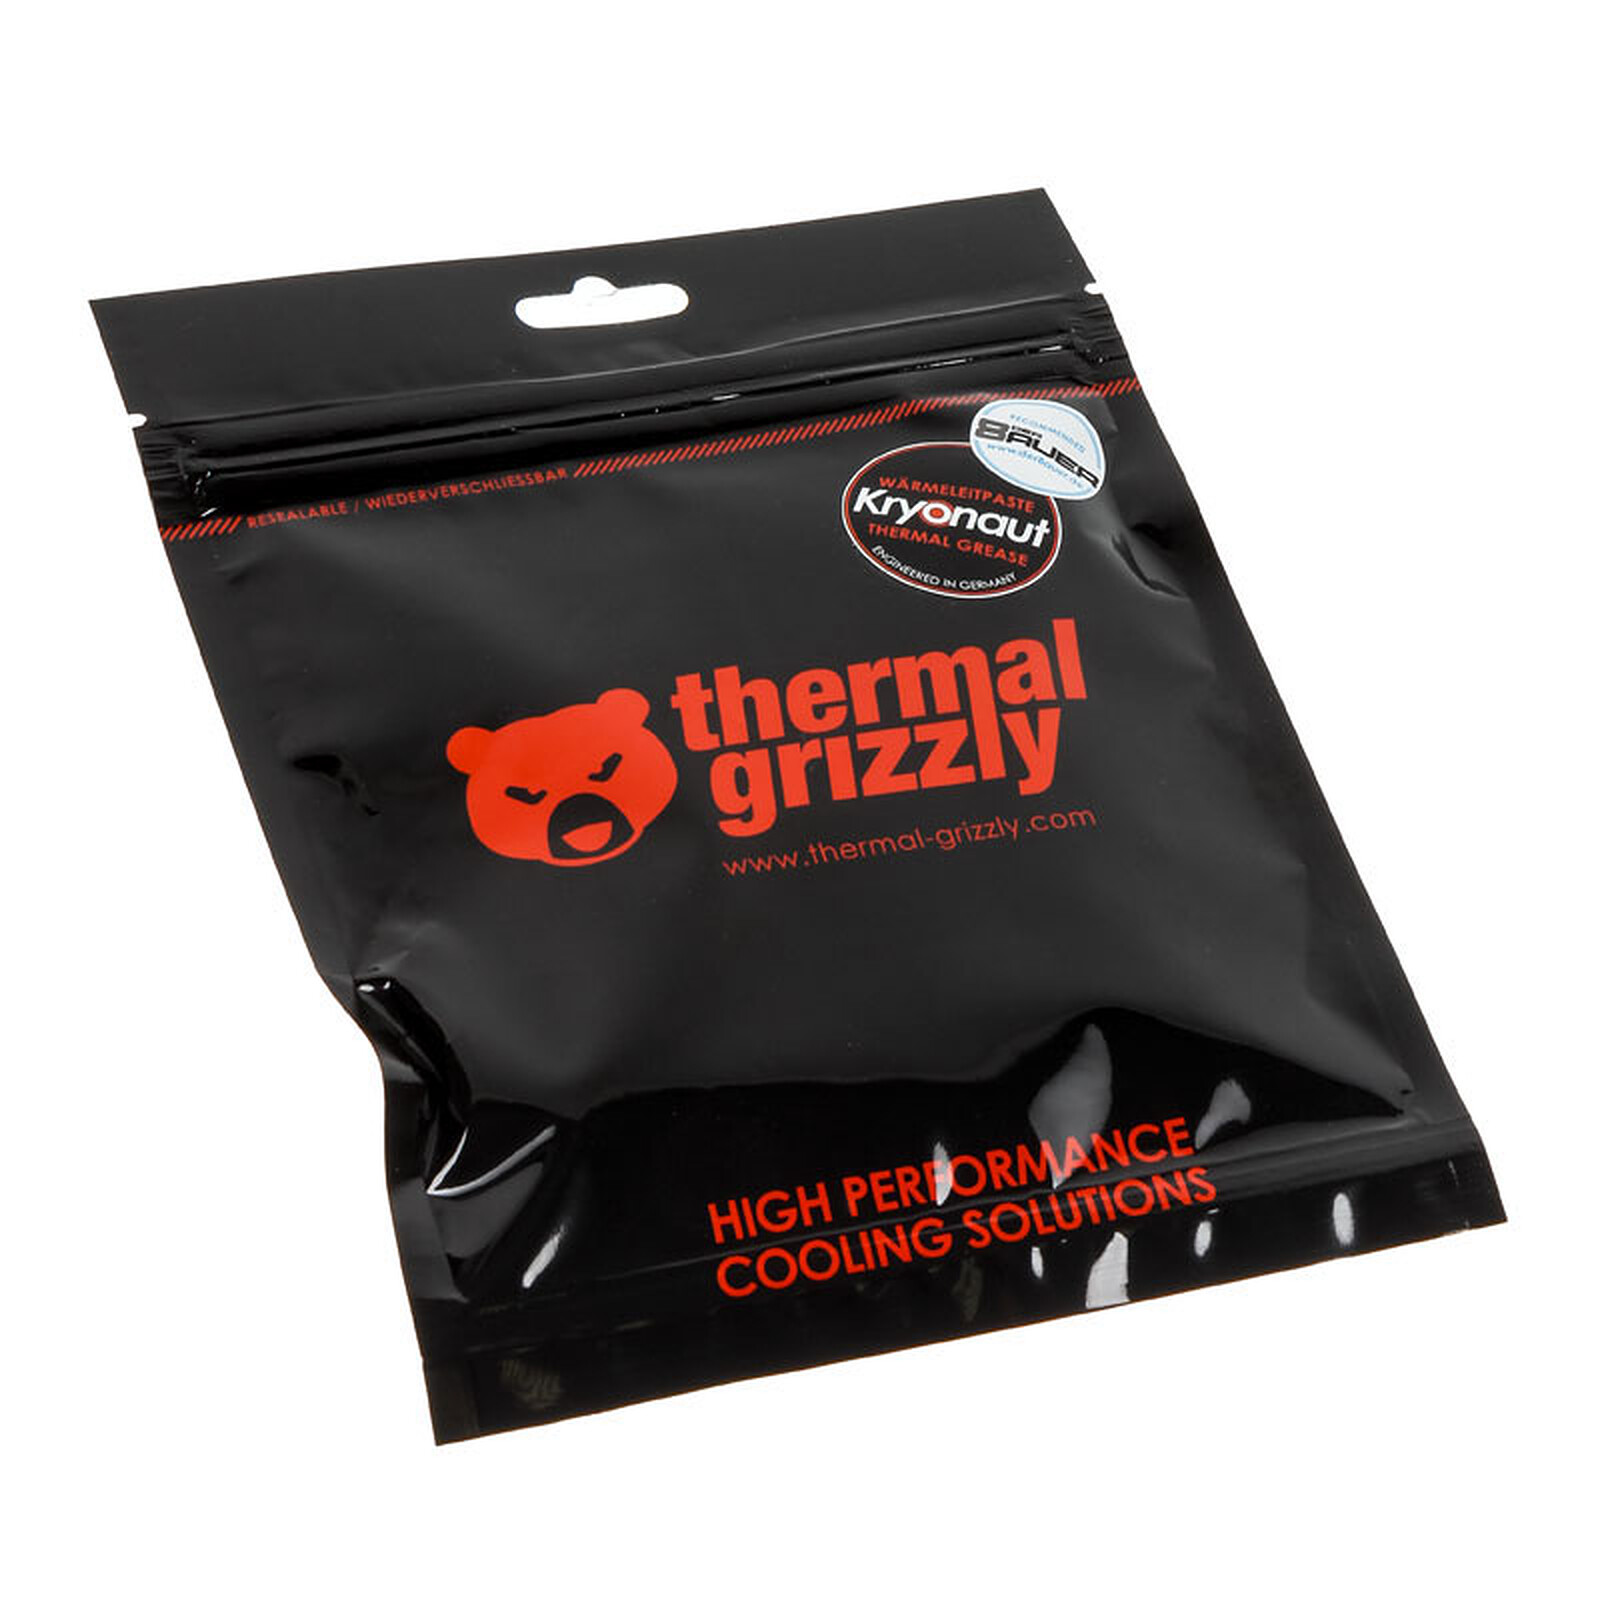 Thermal Grizzly Pâte thermique - 1 gramme